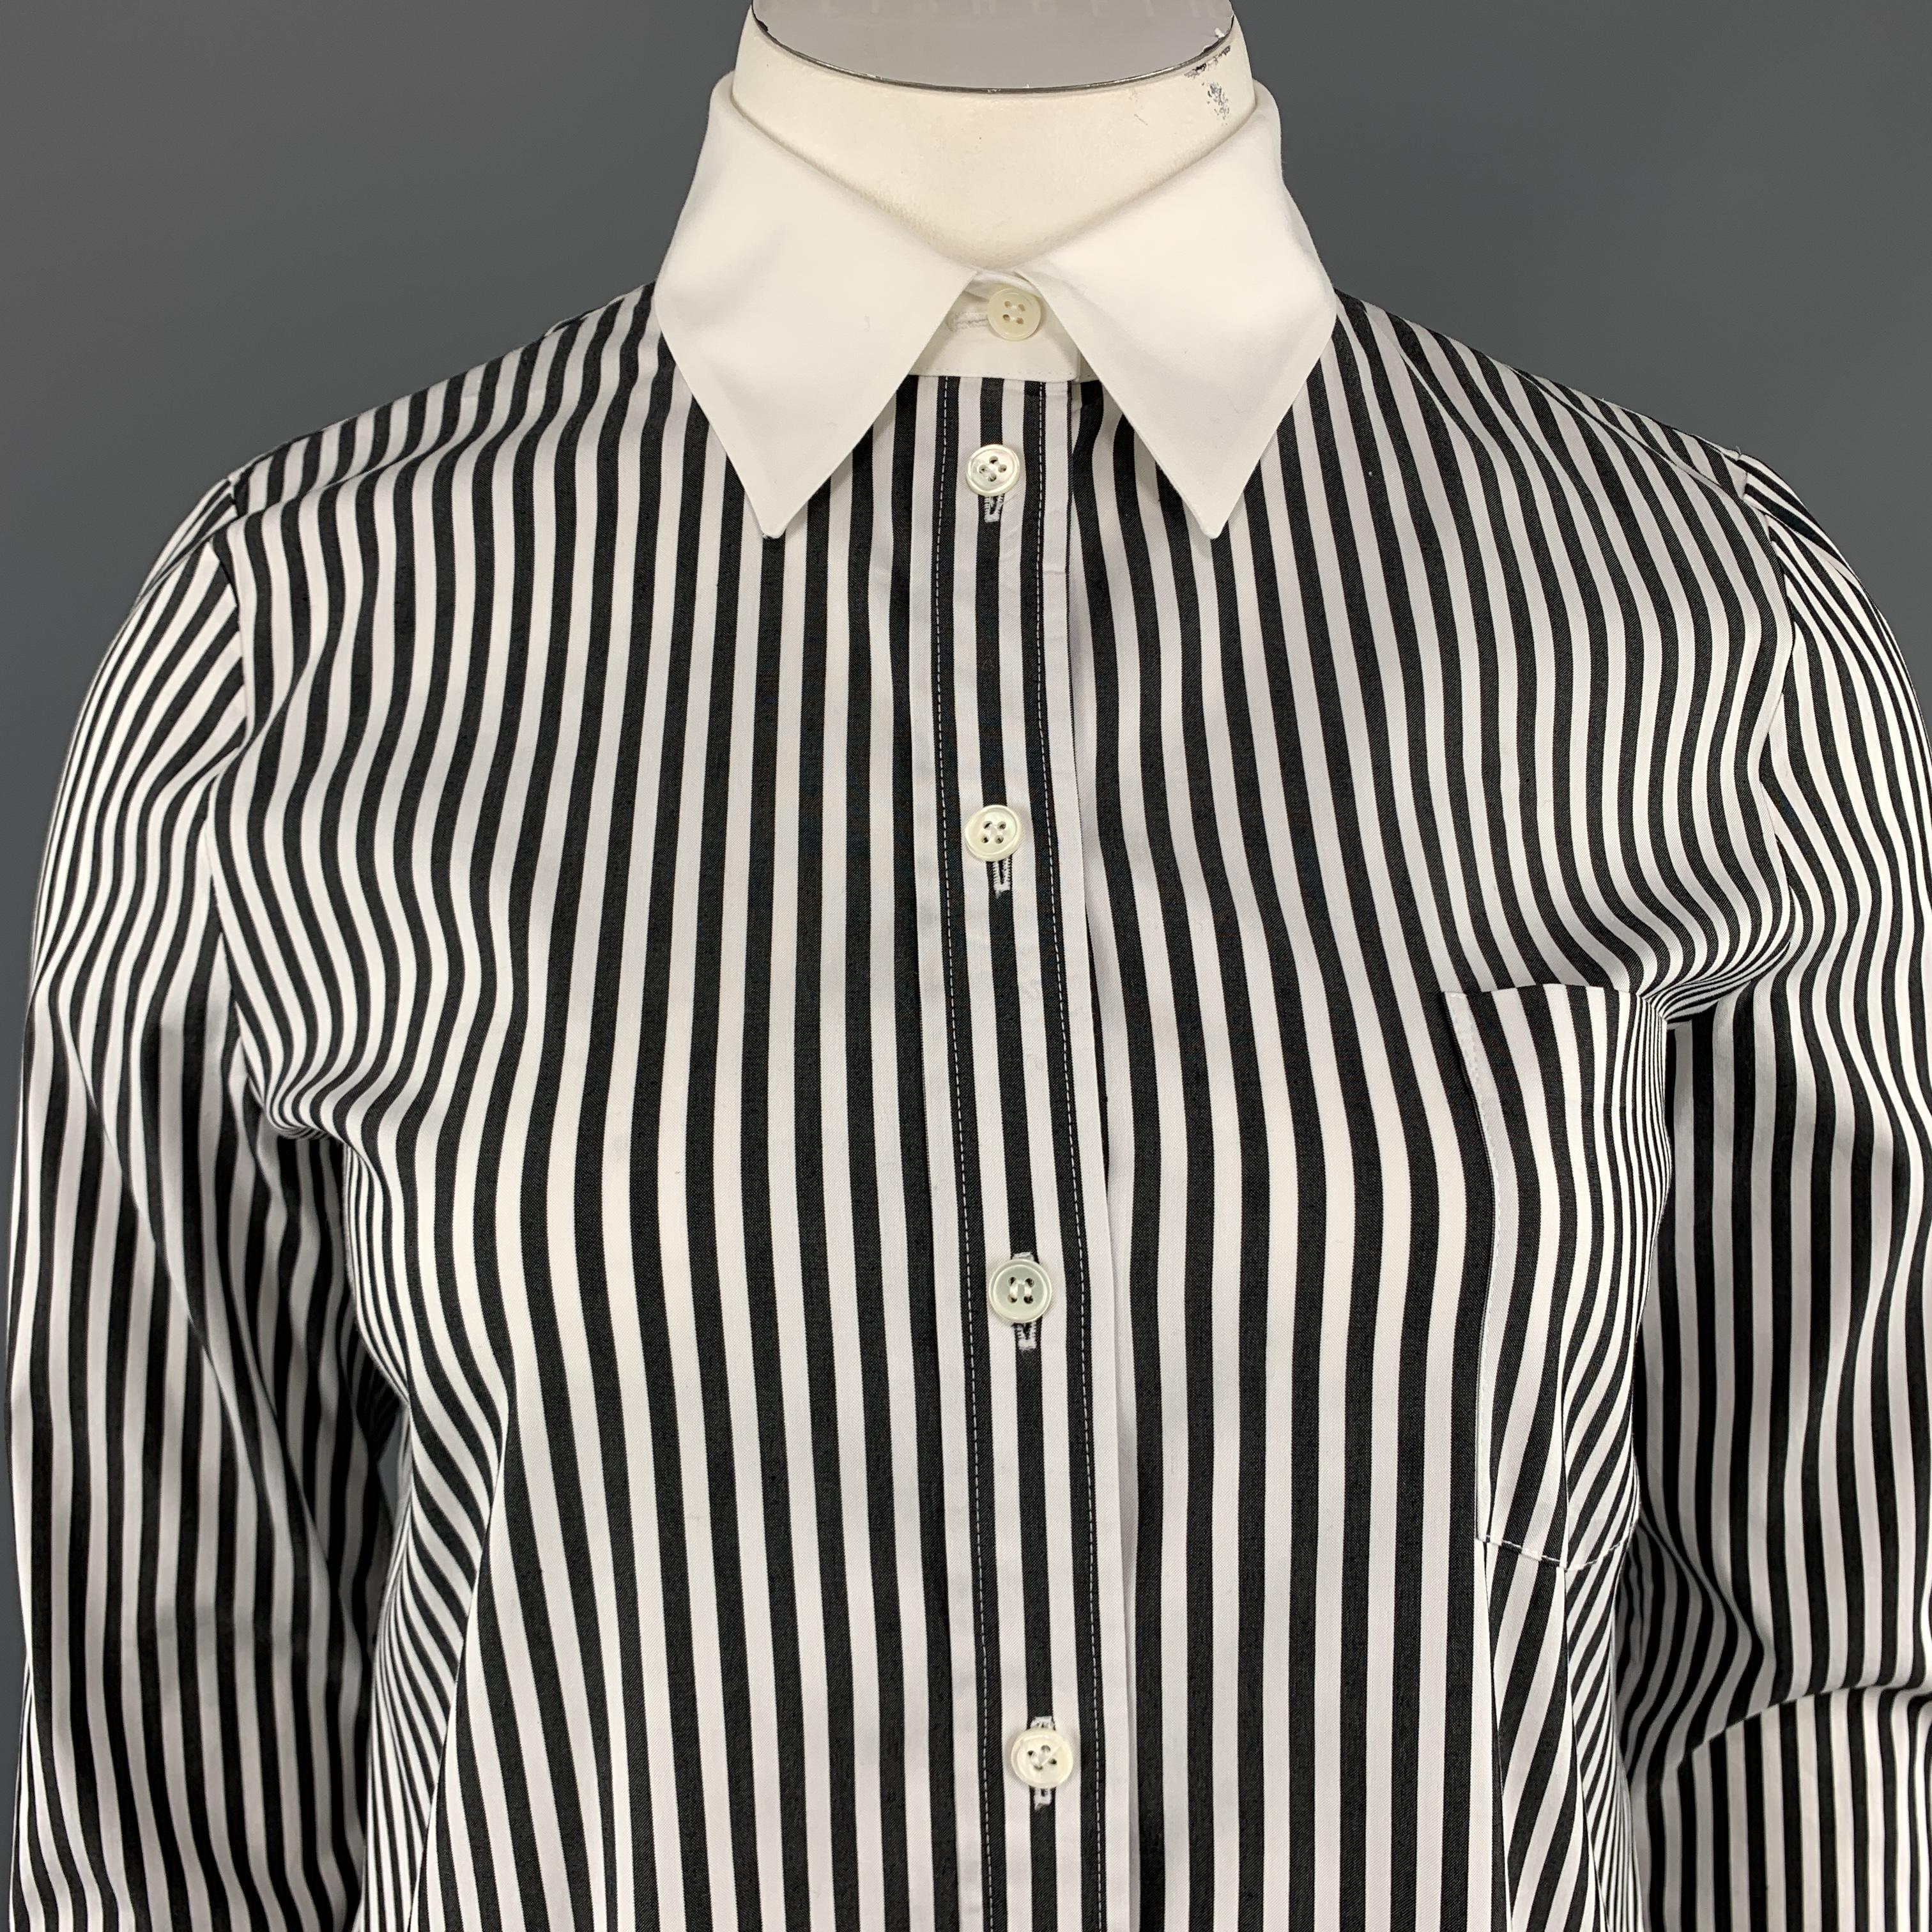 MICHAEL KORS shirt comes in black and white striped stretch cotton with white contrast collar, breast pocket, and French cuff. Made in Italy.
 

Excellent Pre-Owned Condition.
Marked: 12

Measurements:

Shoulder: 16 in.
Bust: 44 in.
Sleeve: 25.5